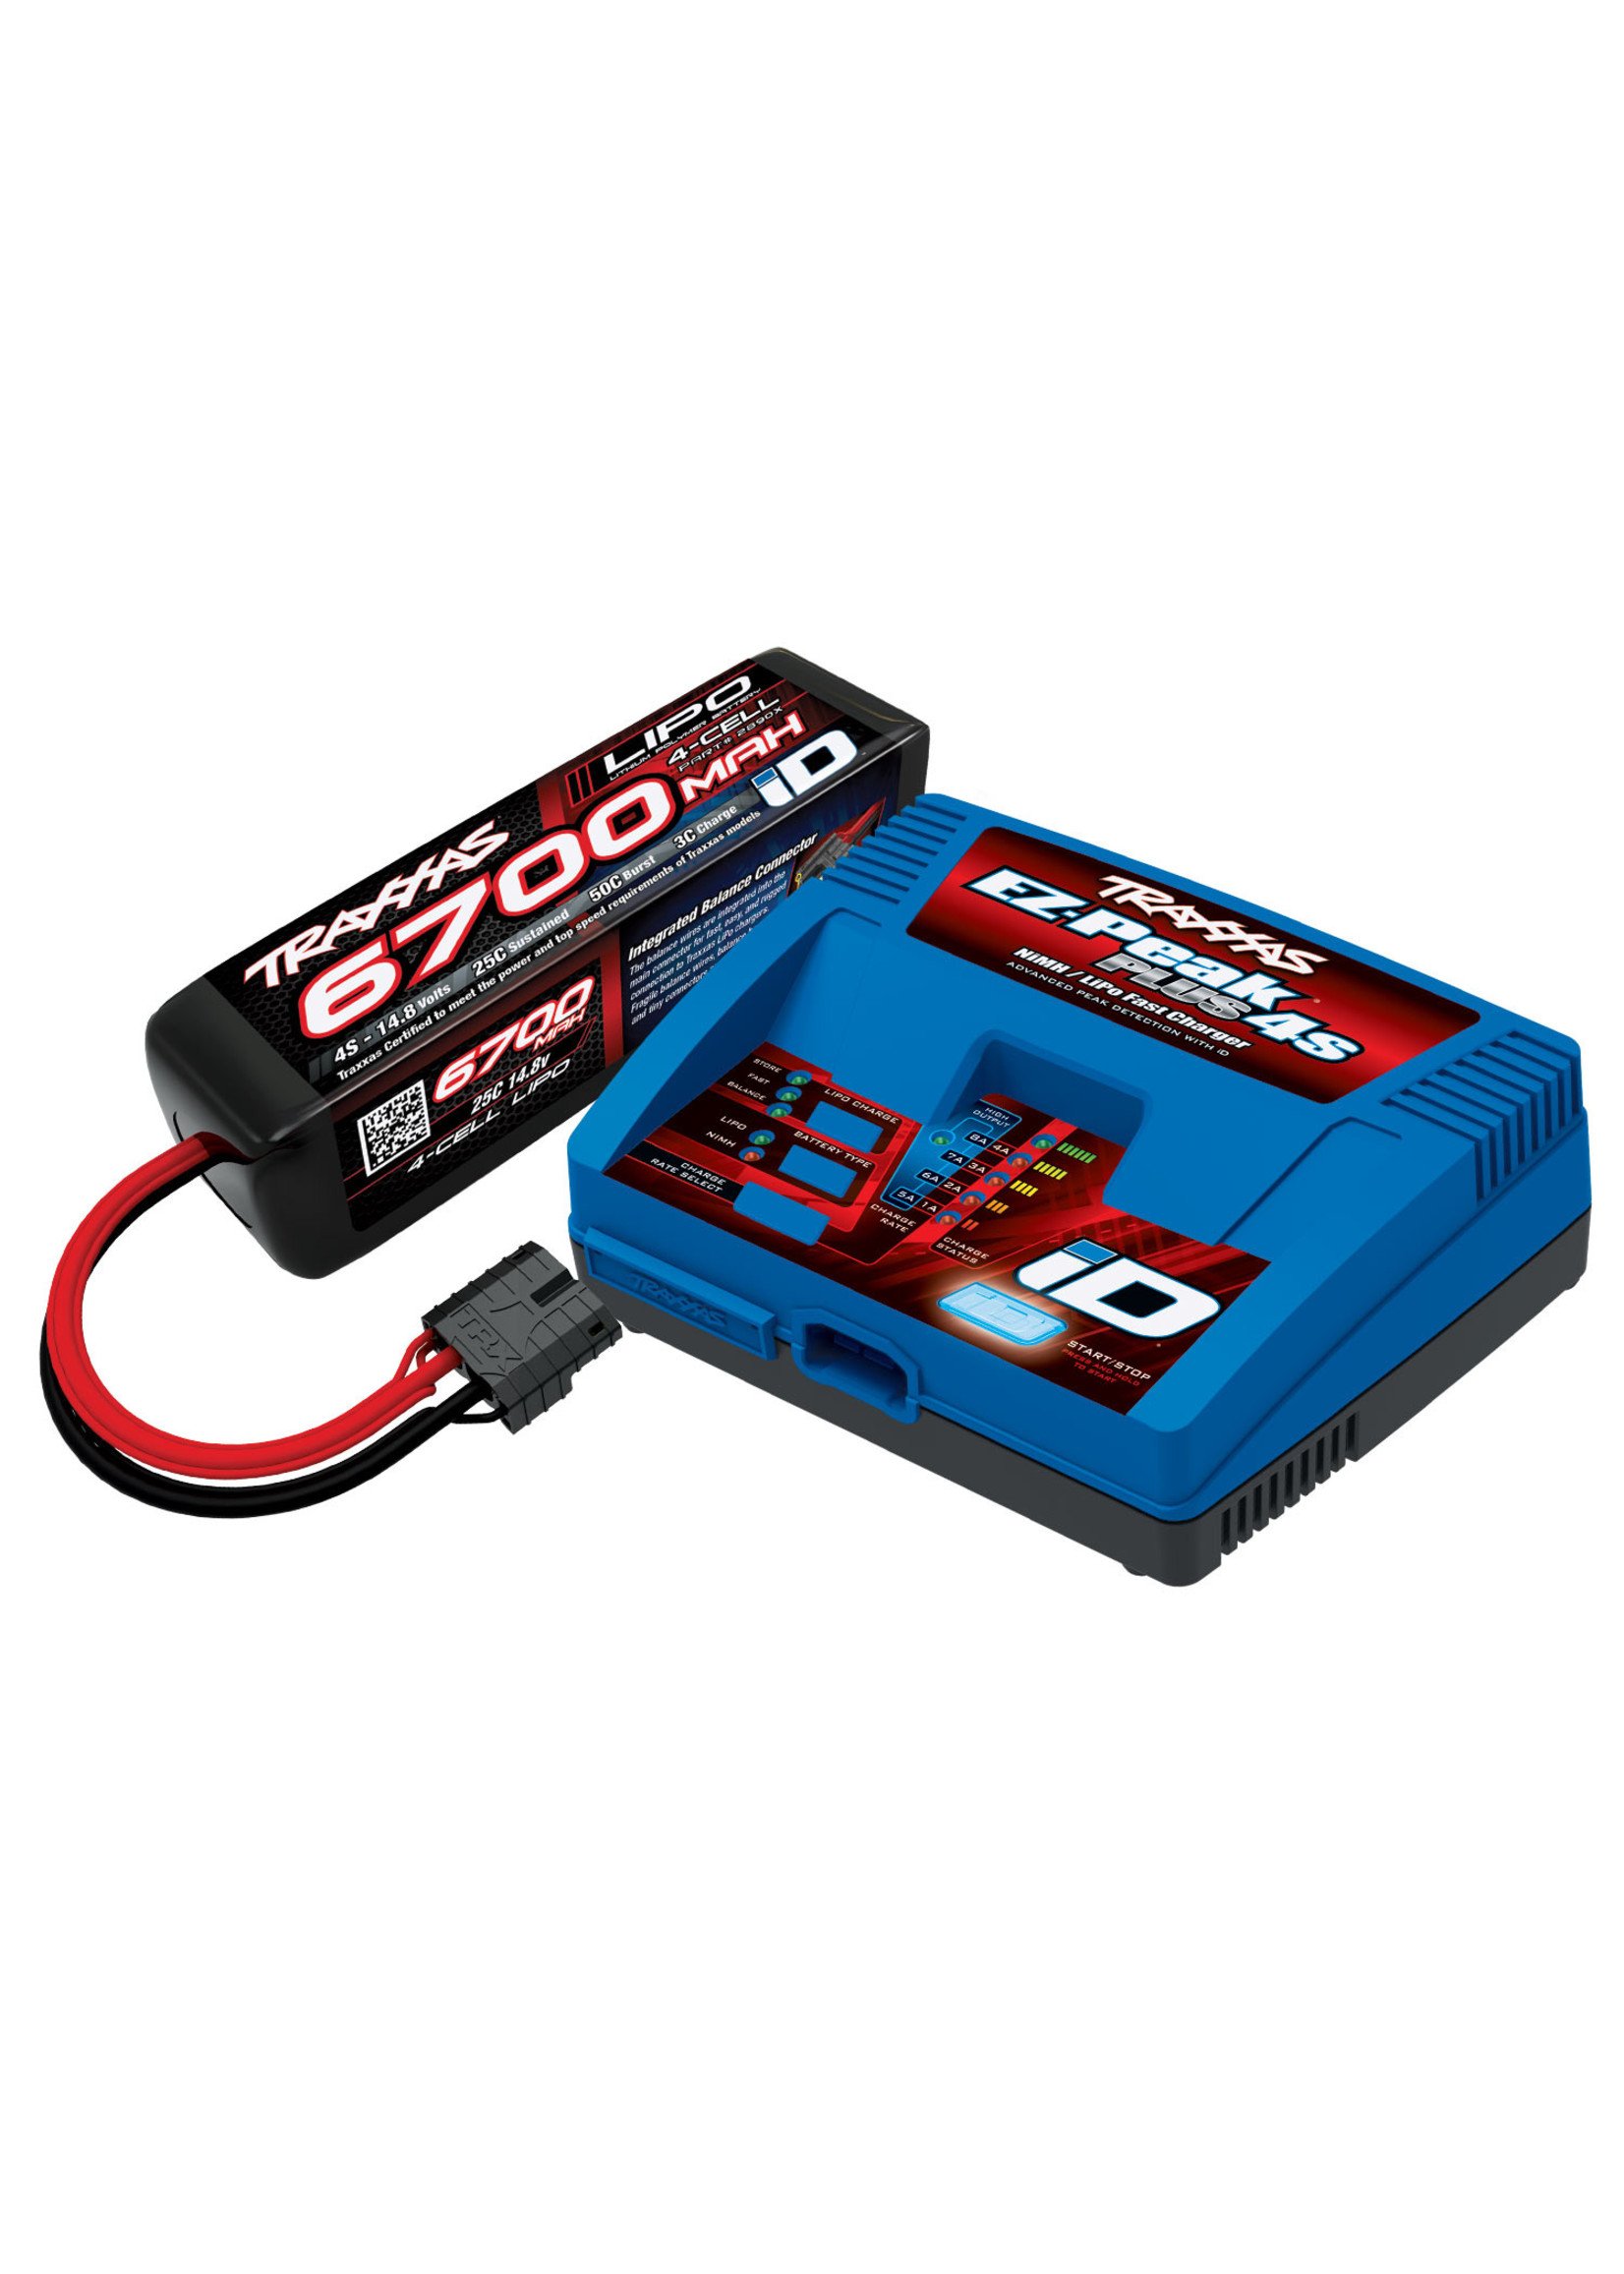 Traxxas TRA2998 Traxxas Battery/charger completer pack (includes #2981 iD® charger (1), #2890X 6700mAh 14.8V 4-cell 25C LiPo battery (1))